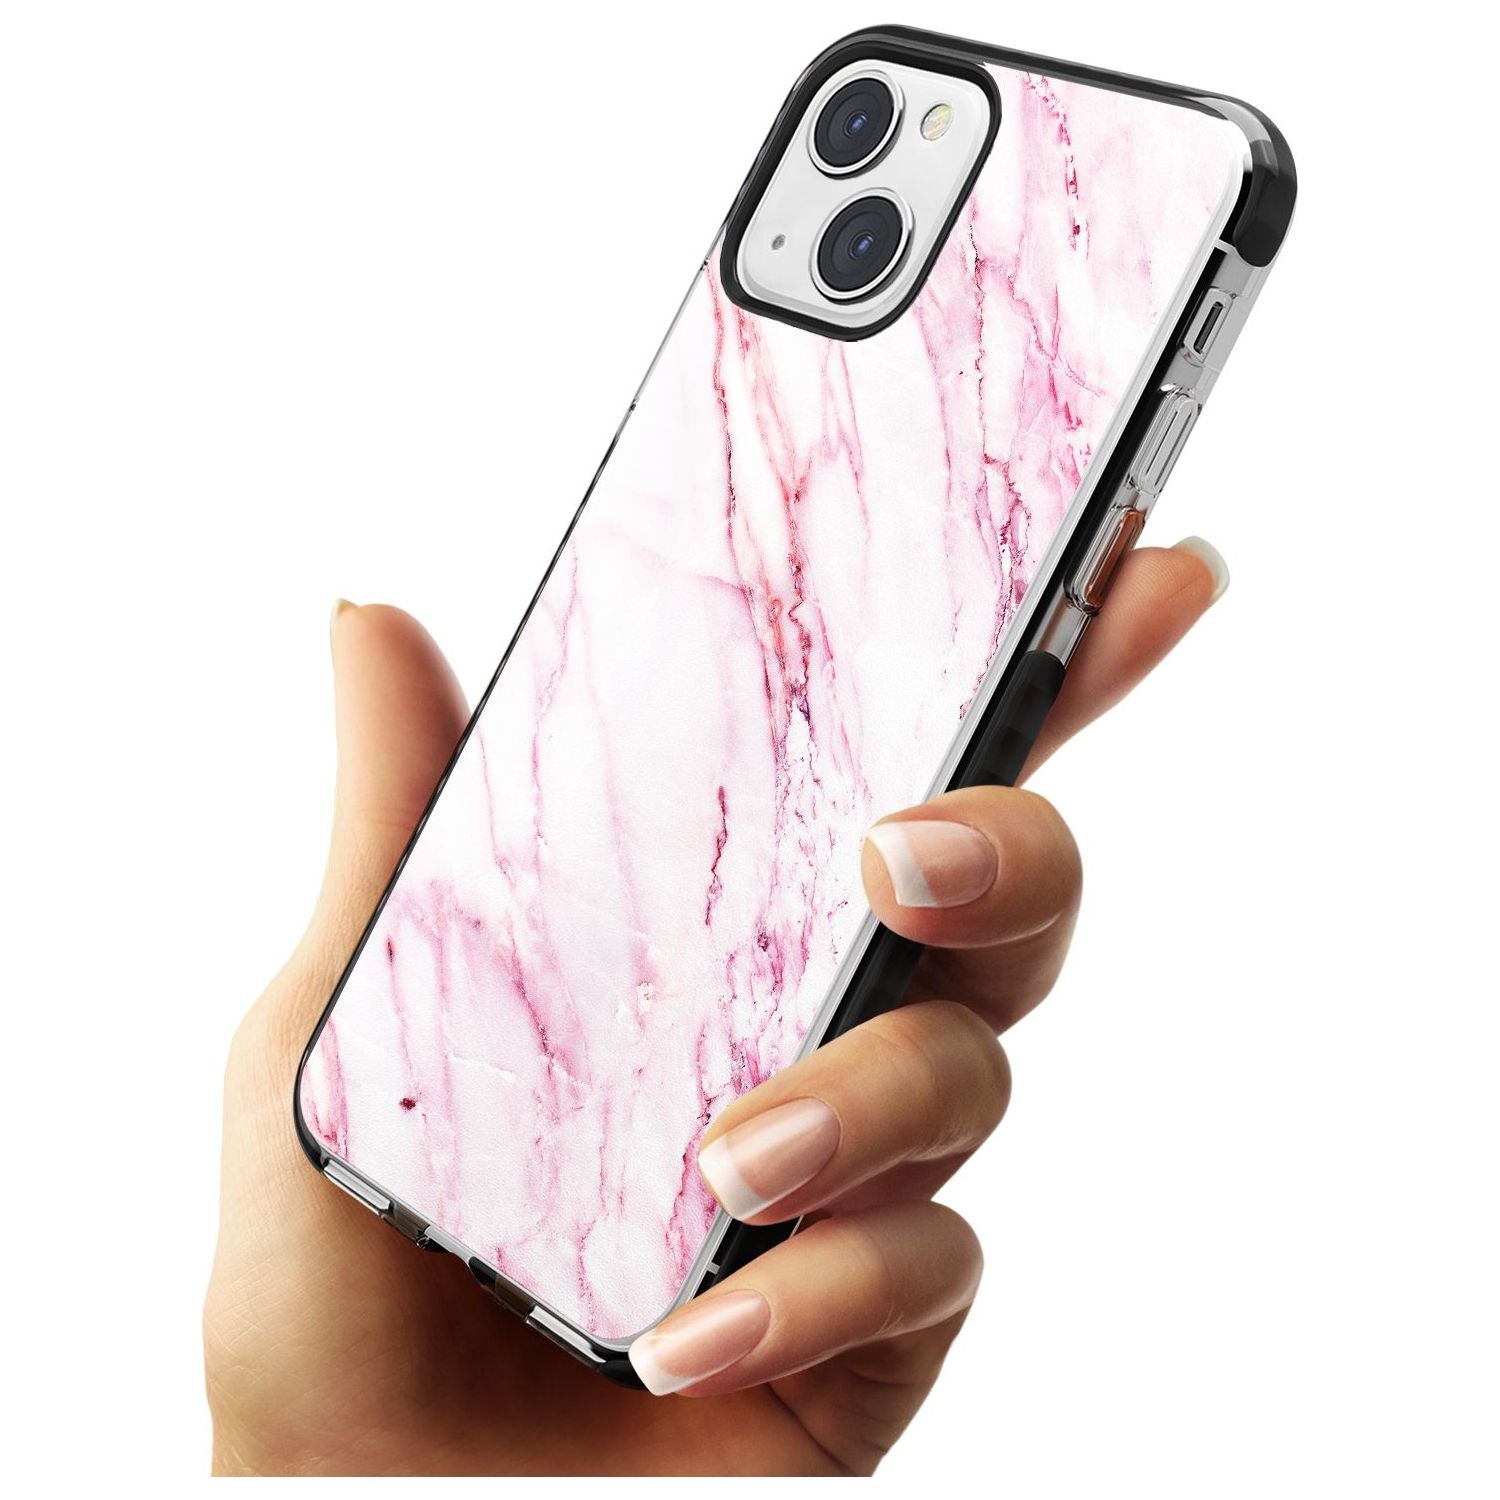 White & Pink Onyx Marble Texture